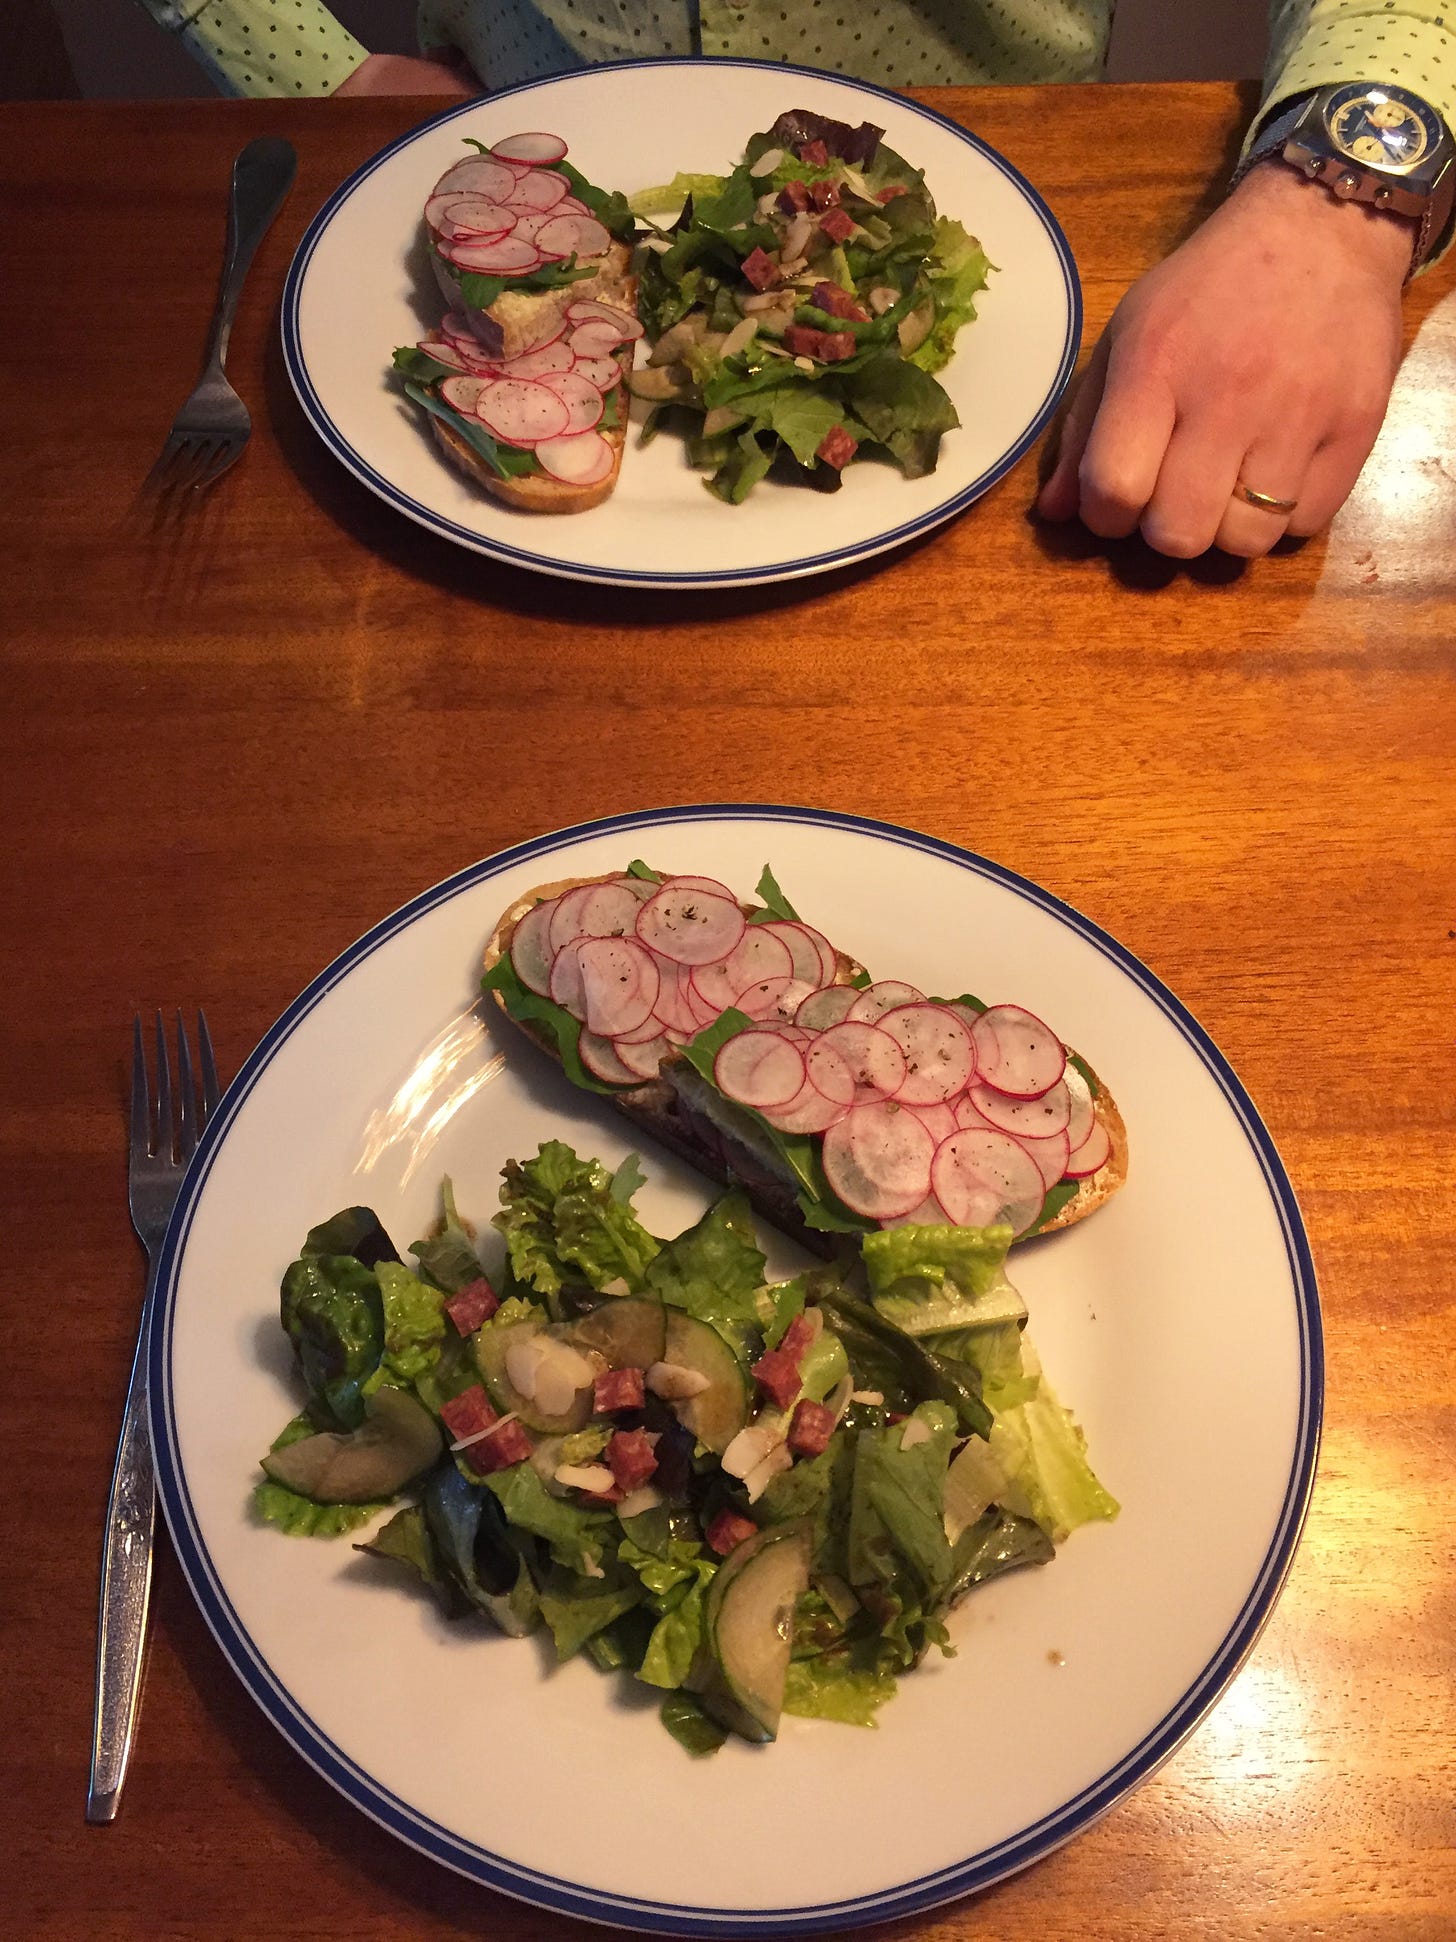 Two plates across from each other on a table, each with two halves of an open-faced sandwich and a large portion of salad. The sandwiches have leaves of arugula beneath piles of very thinly sliced radishes.